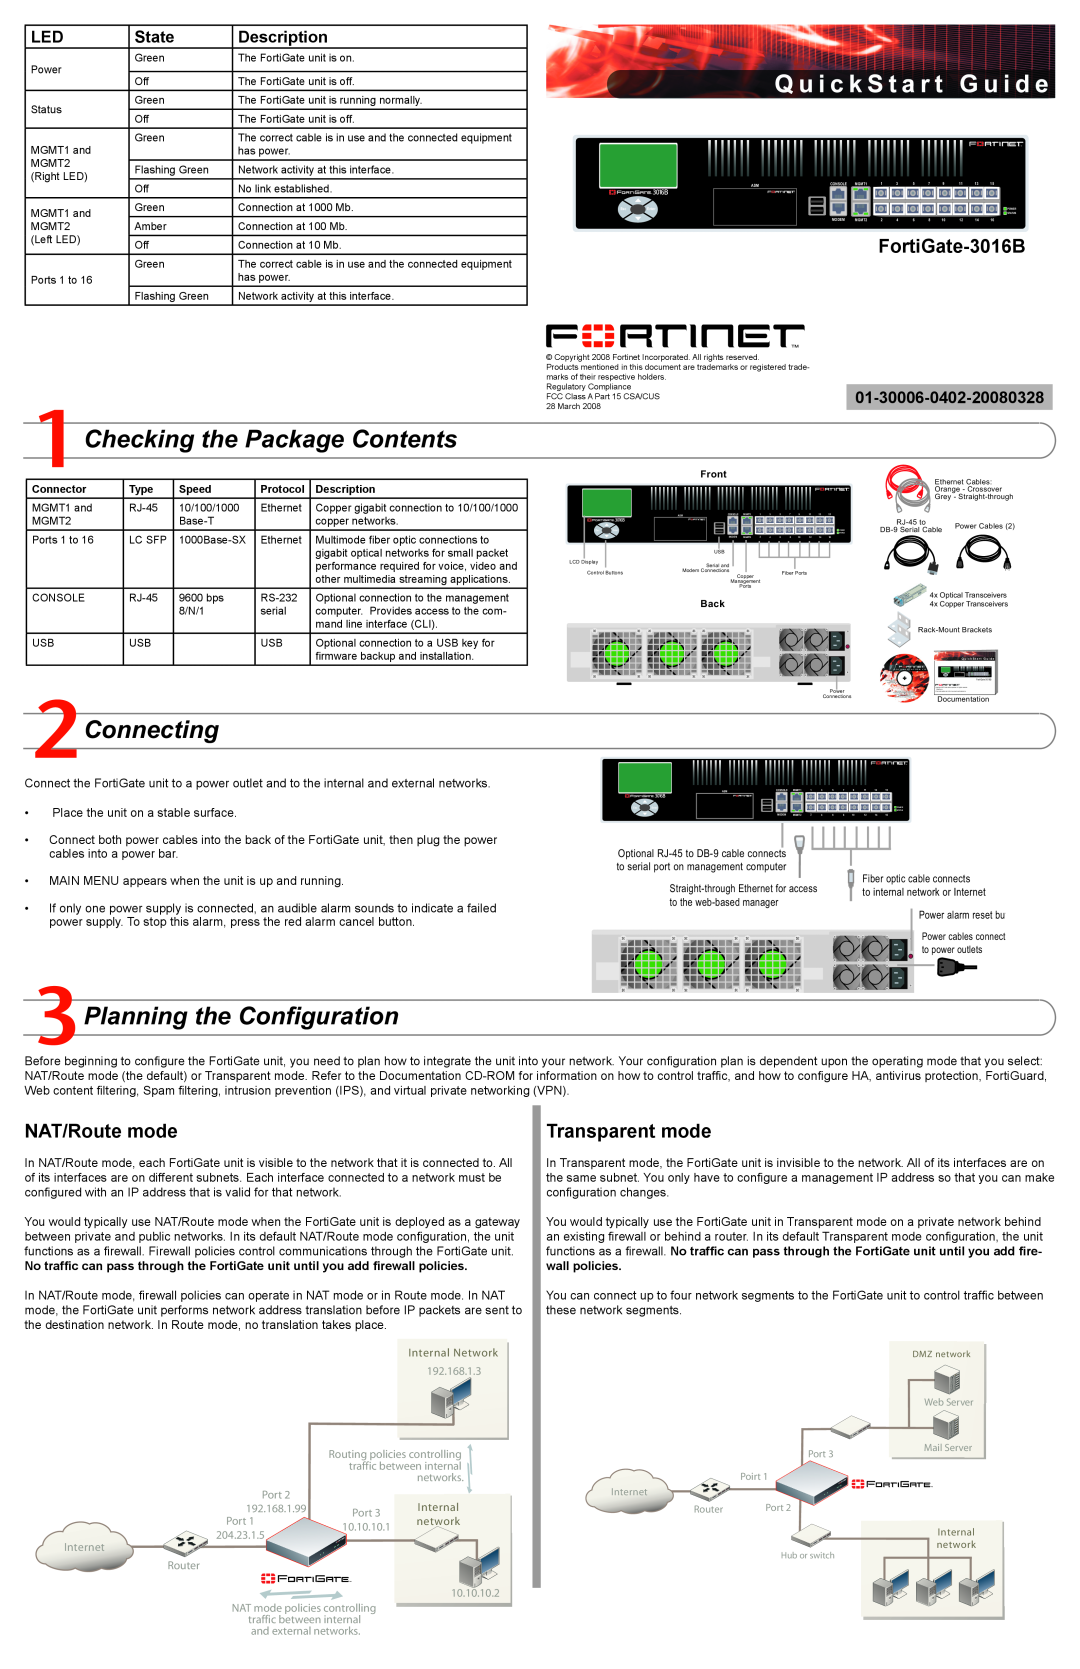 Fortinet user manual Checking the Package Contents, Connecting, Planning the Configuration, FortiGate-3016B, State 